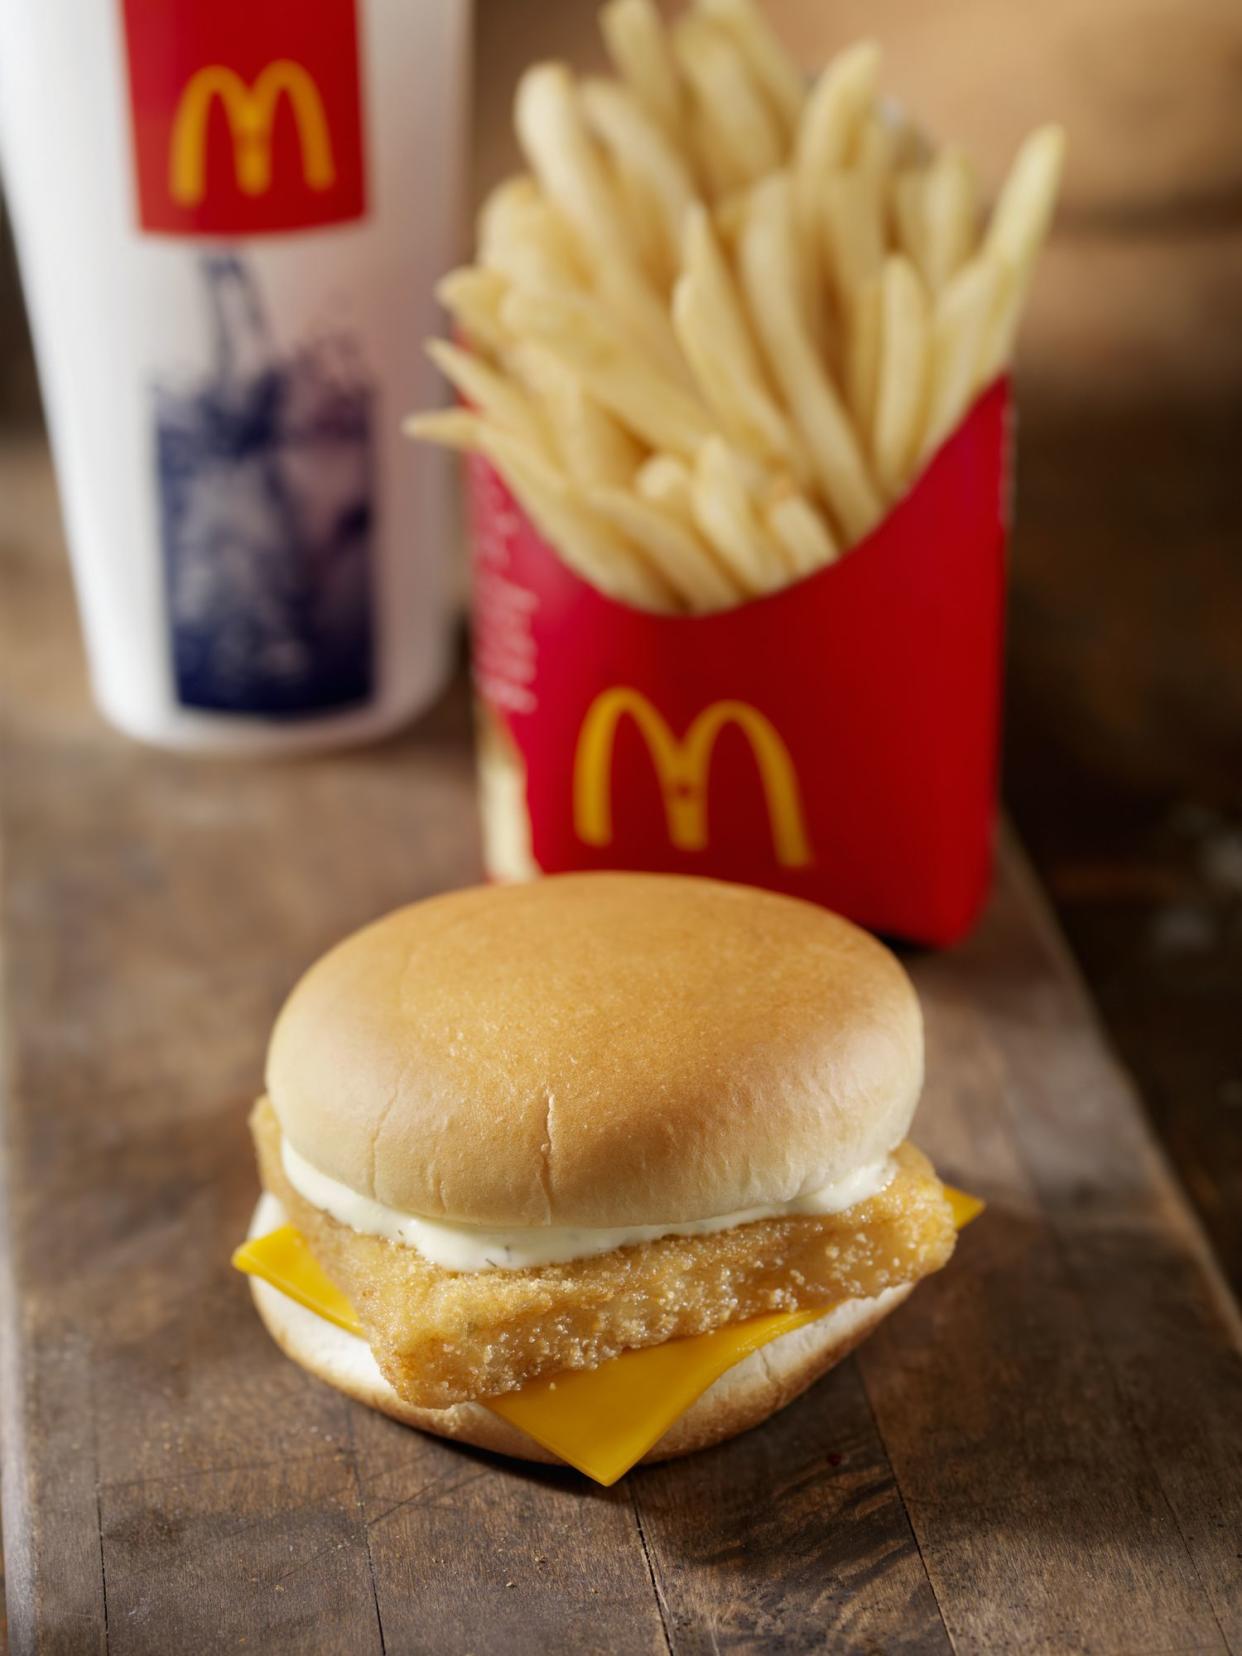 Calgary, Canada - March 15, 2011: McDonalds Fillet of Fish Meal. Shot in a photography studio on a wood table.